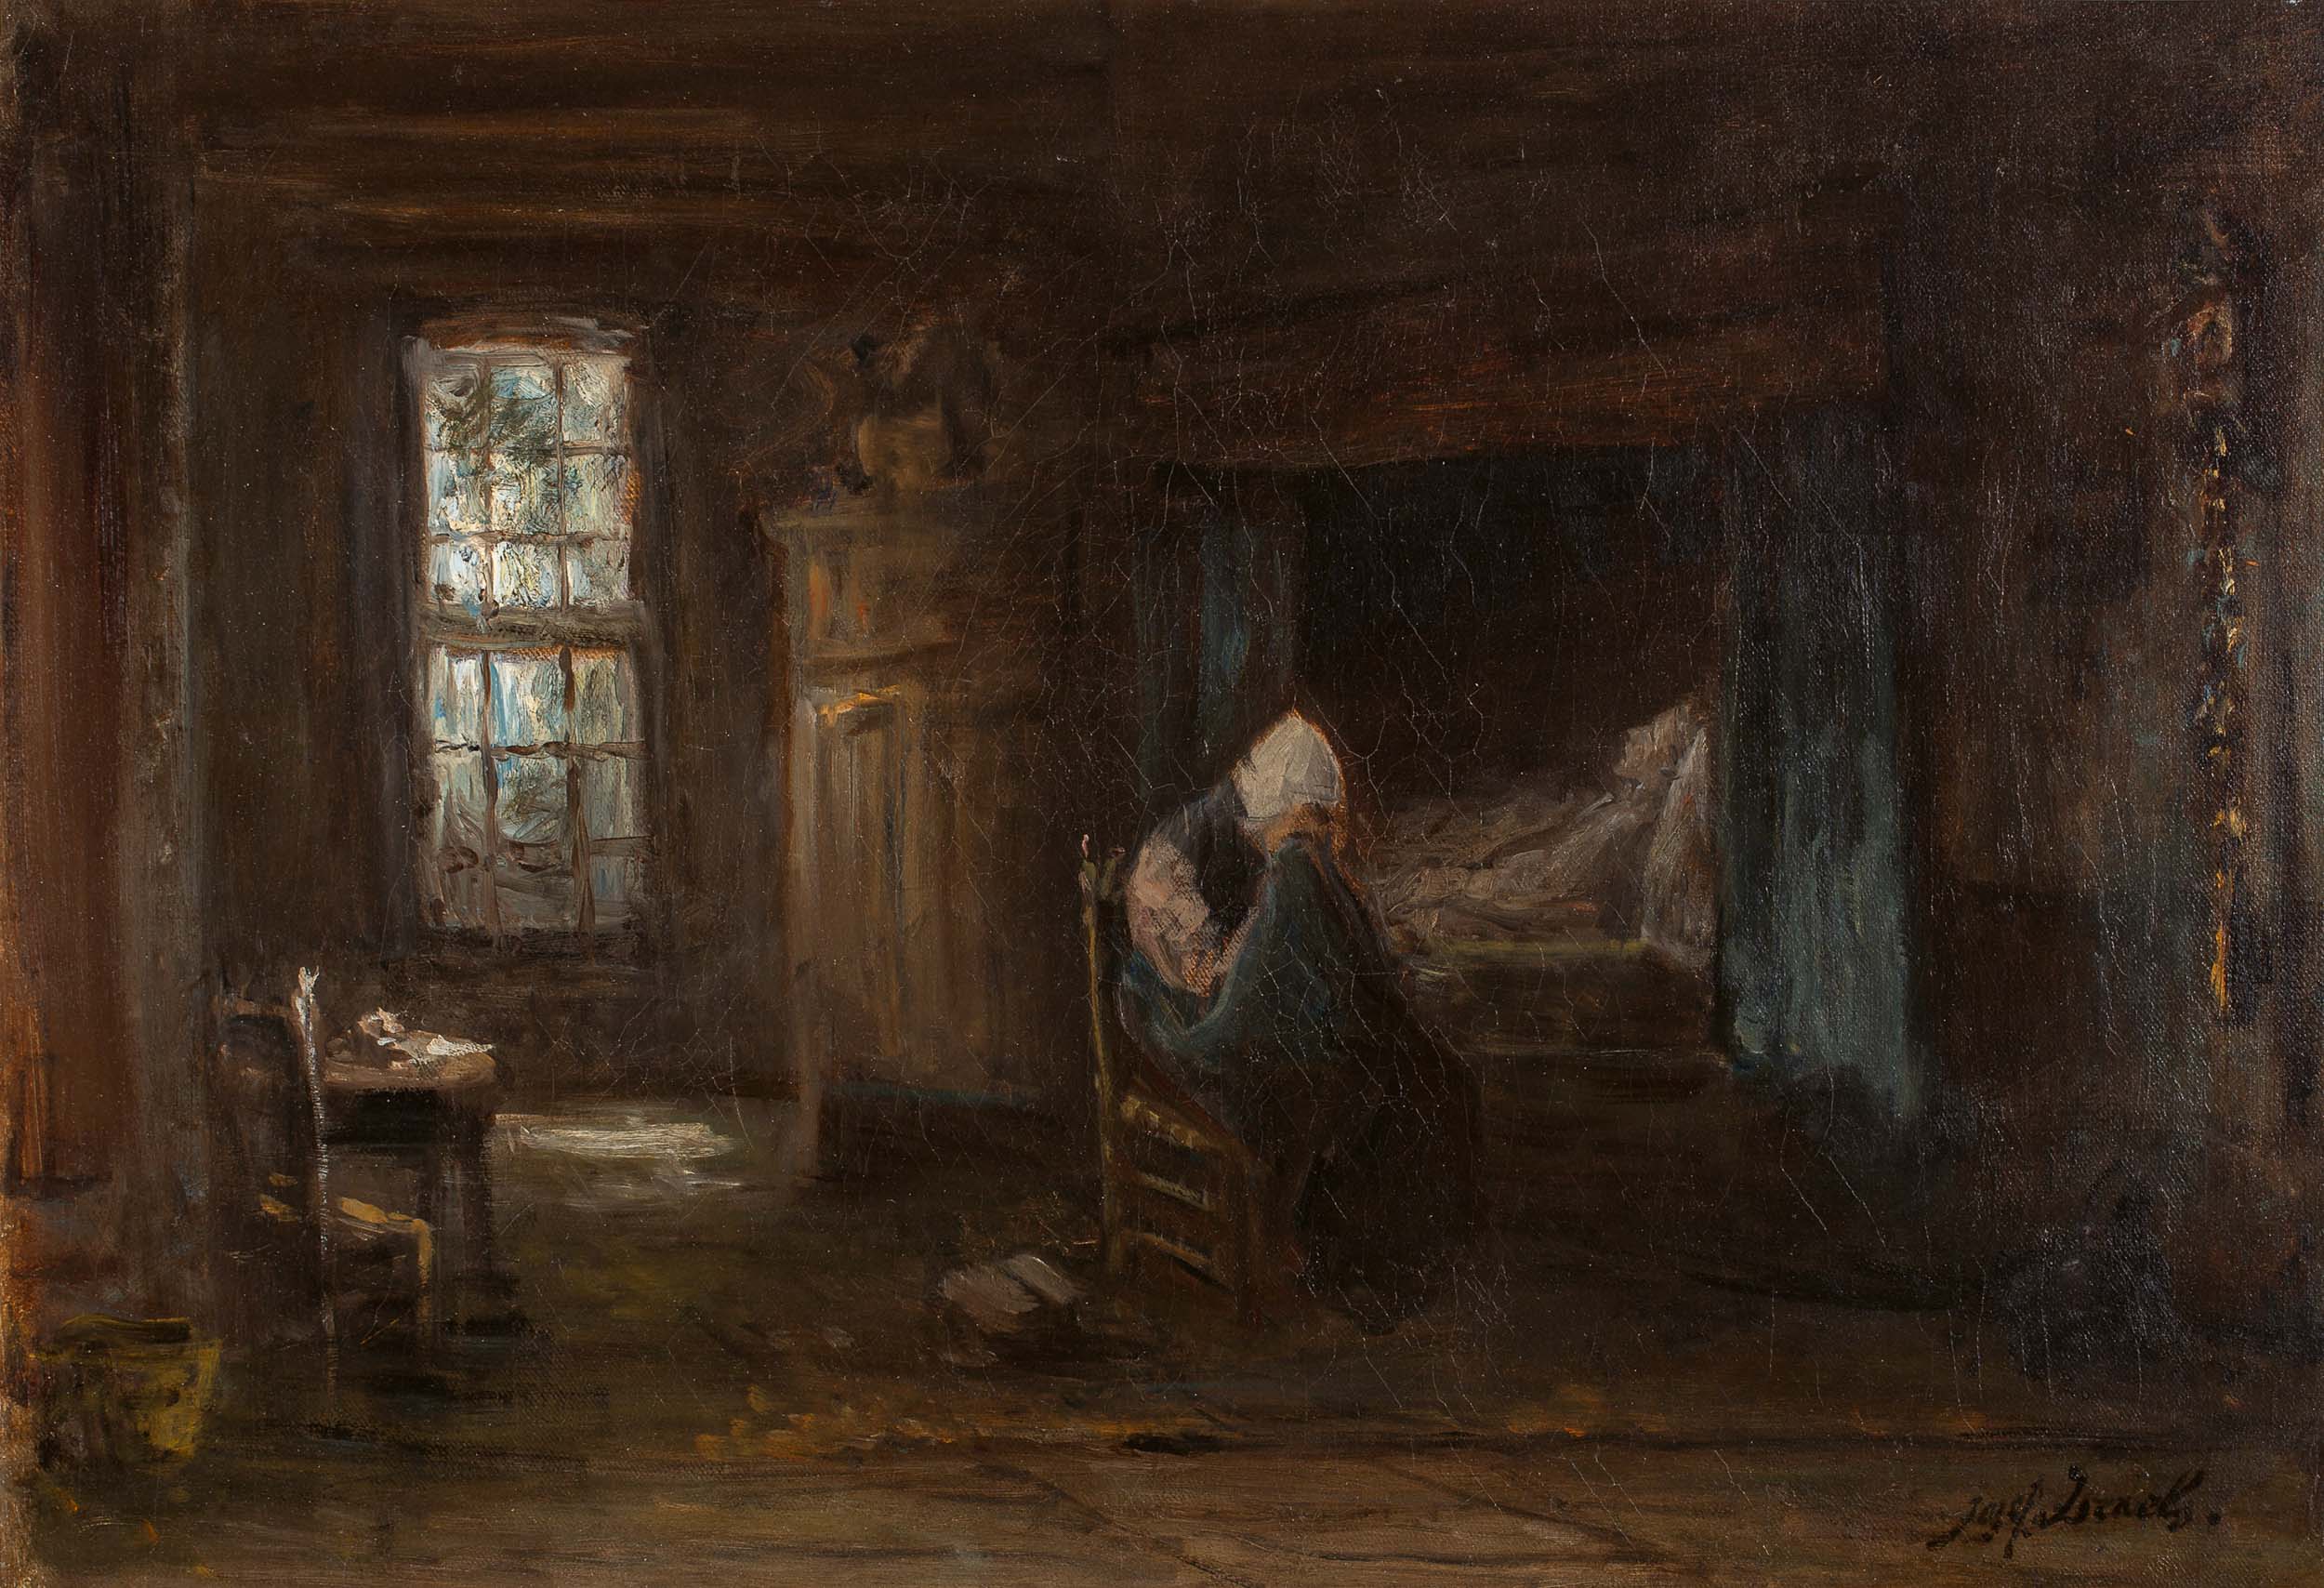 Alone in the World (c. 1878)